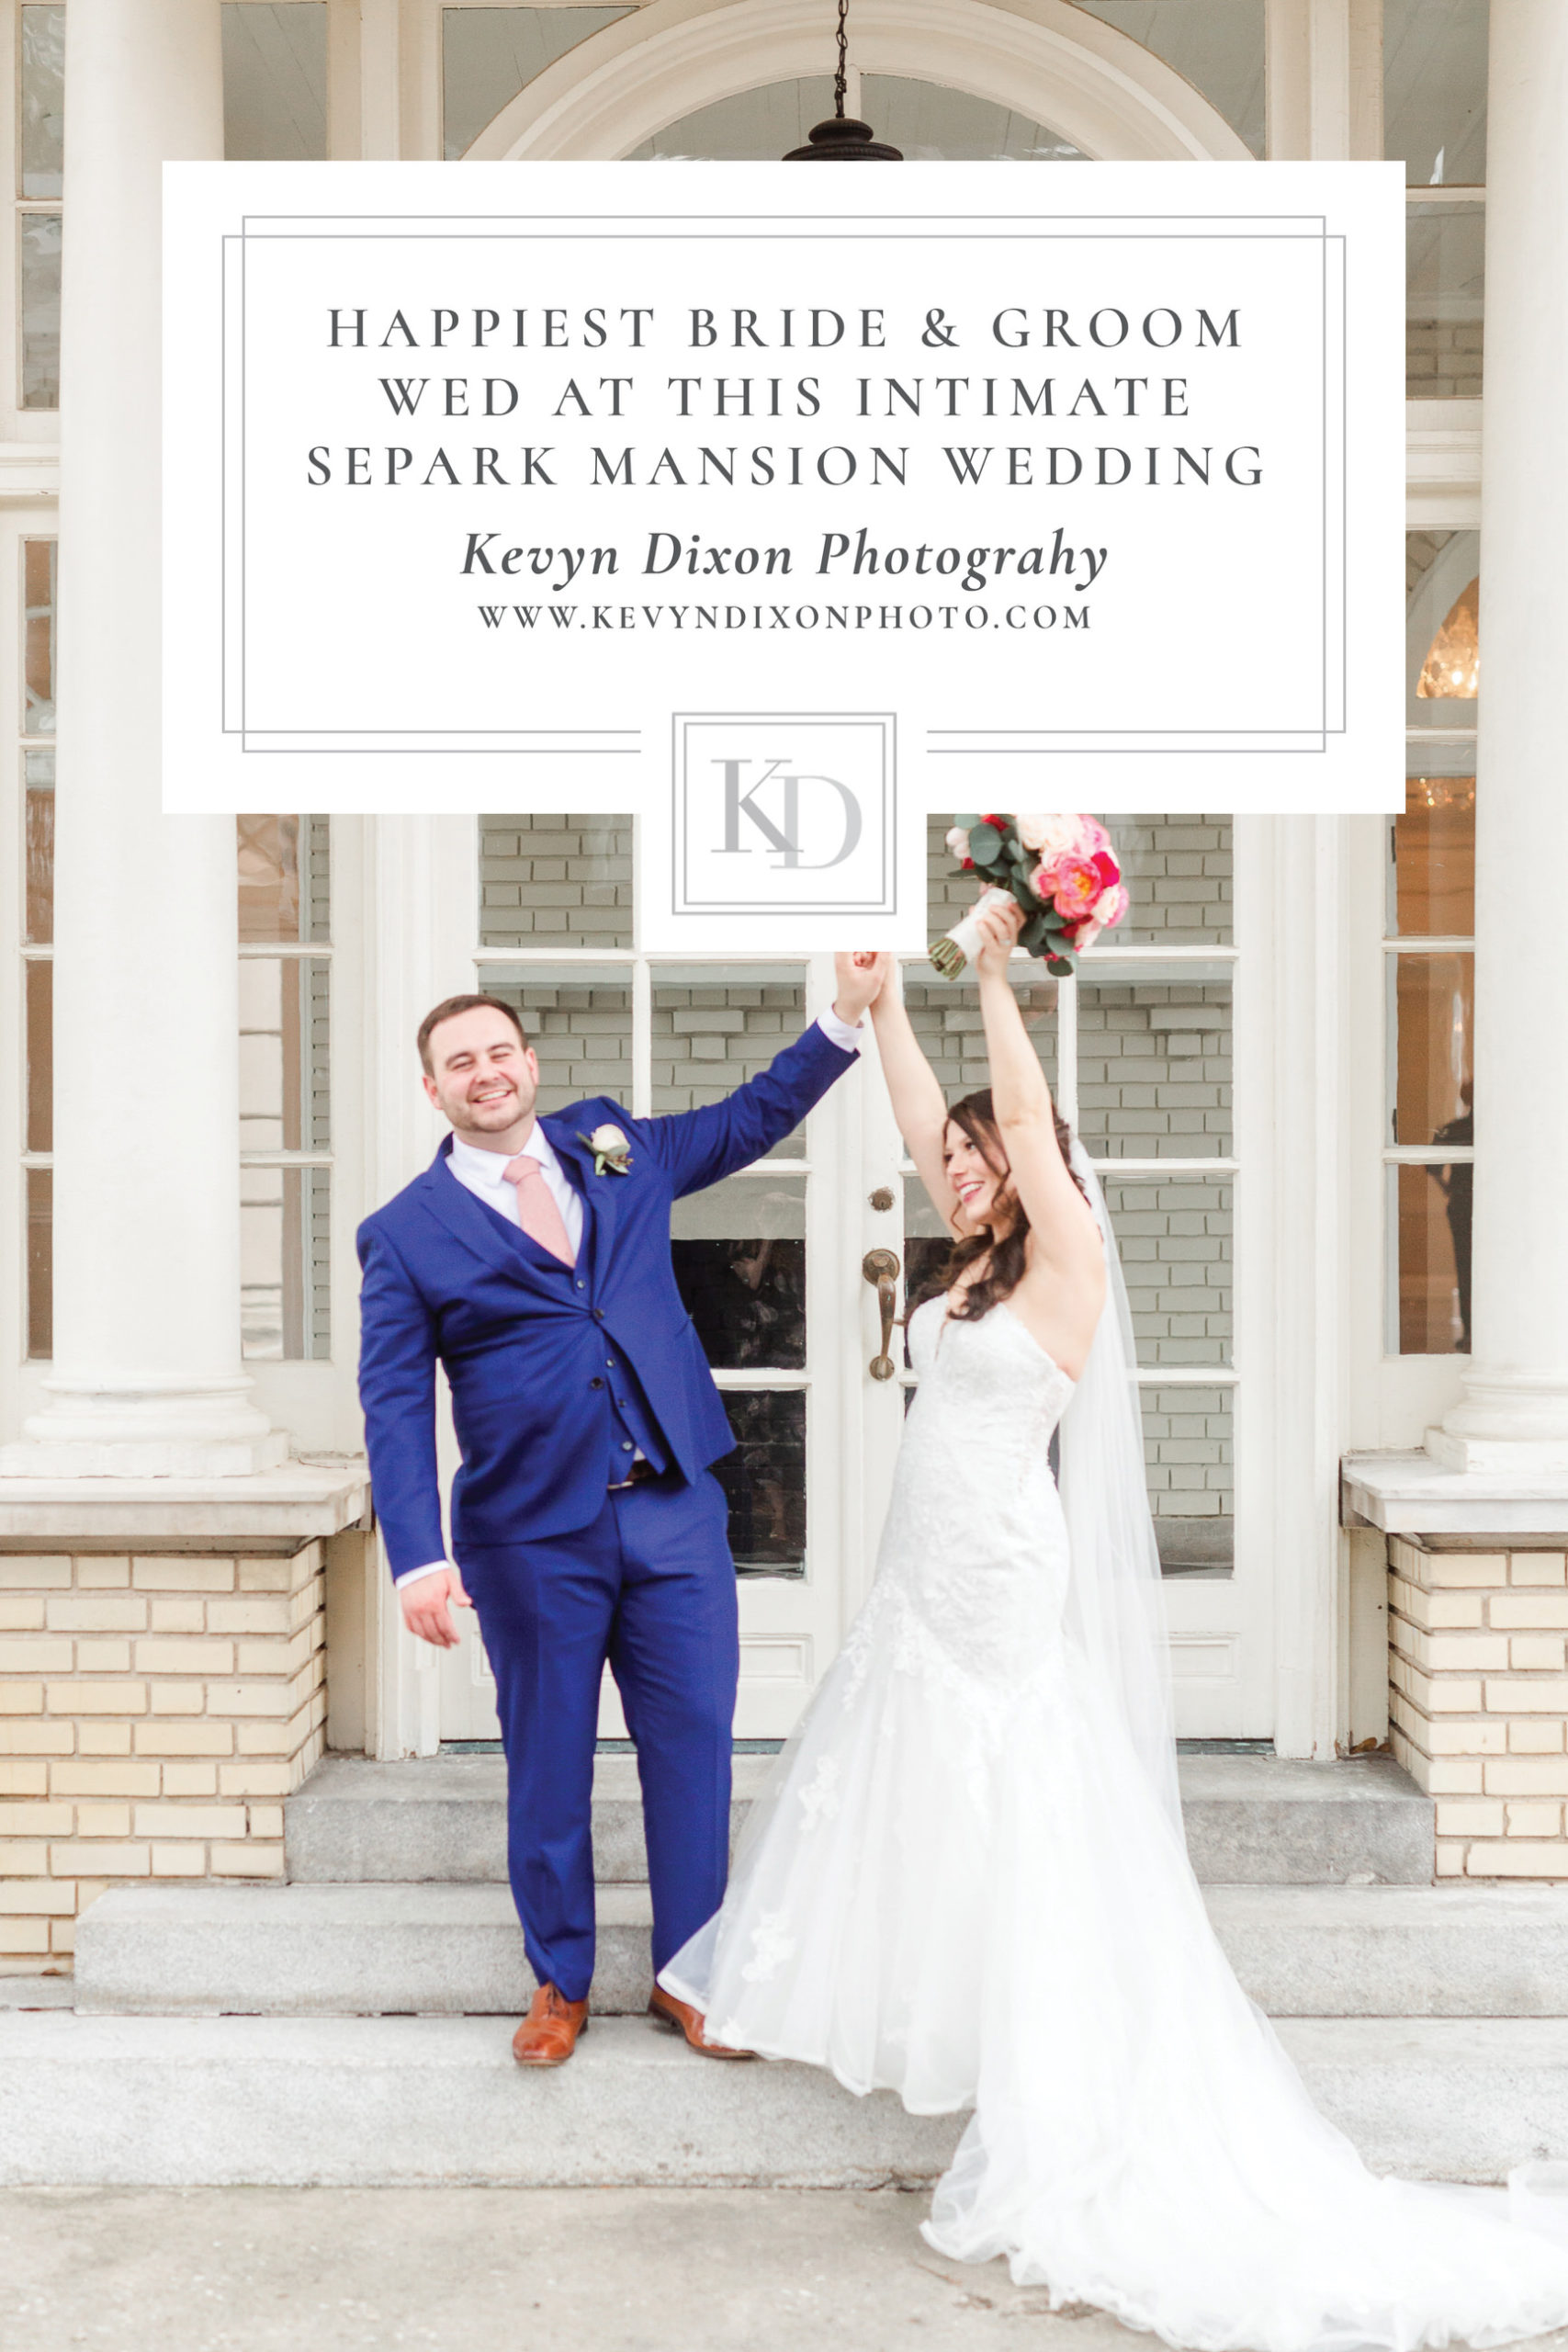 Happiest Bride and Groom Wed at this Intimate Separk Mansion Wedding pin image from Kevyn Dixon Photography Blog